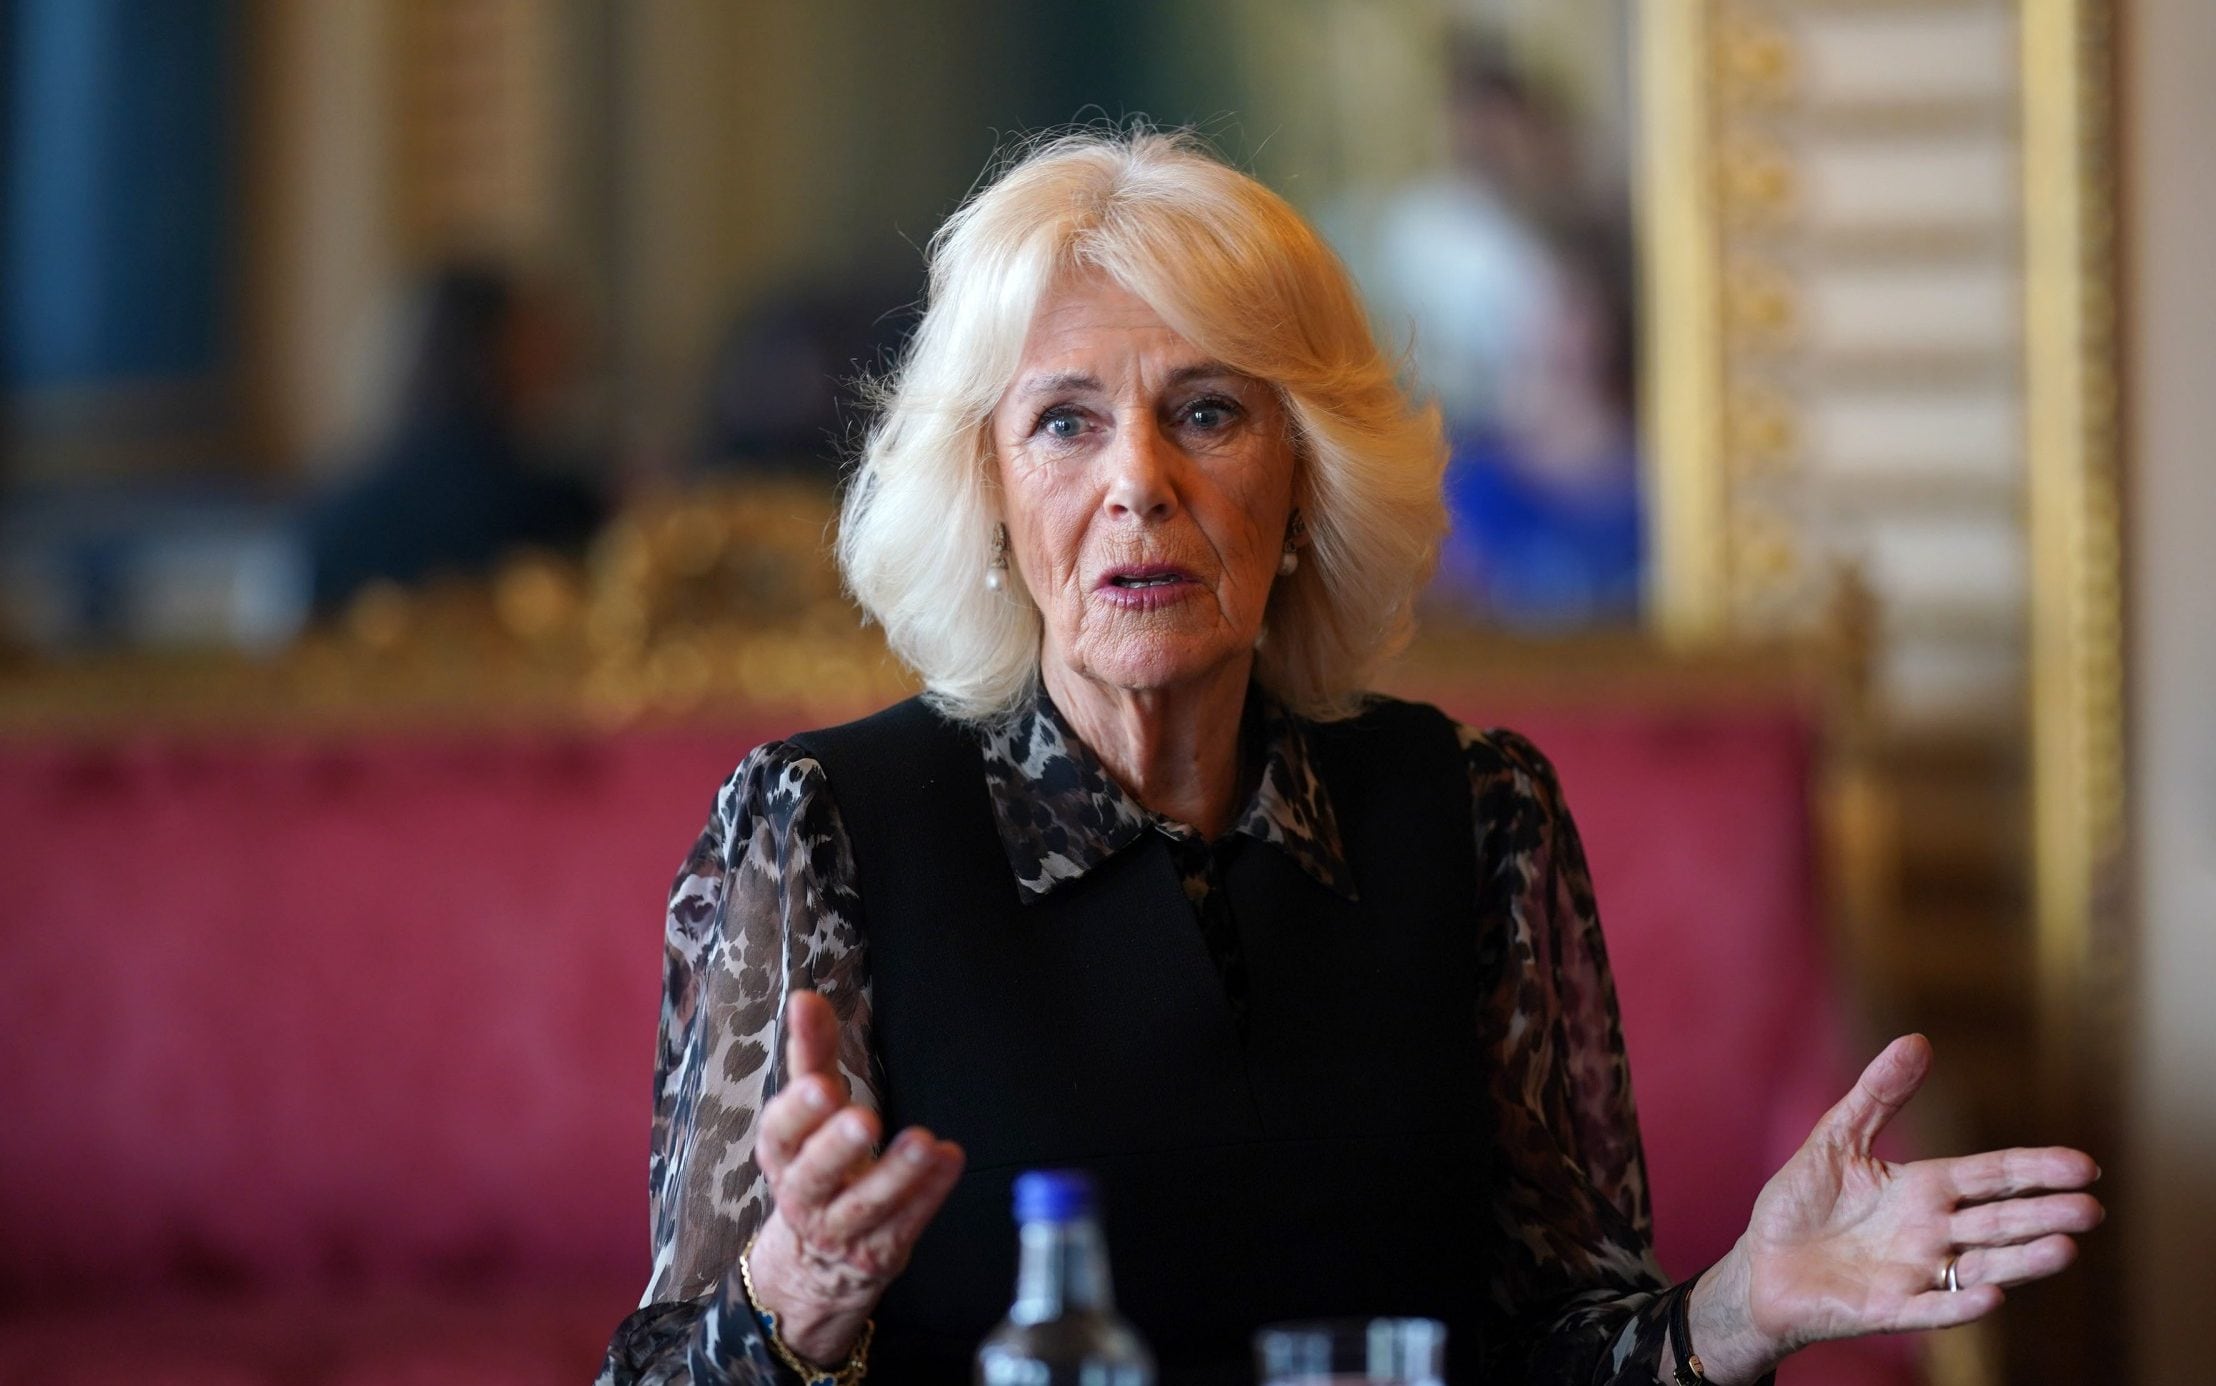 queen suggests pop-up shops in schools could help children suffering domestic abuse